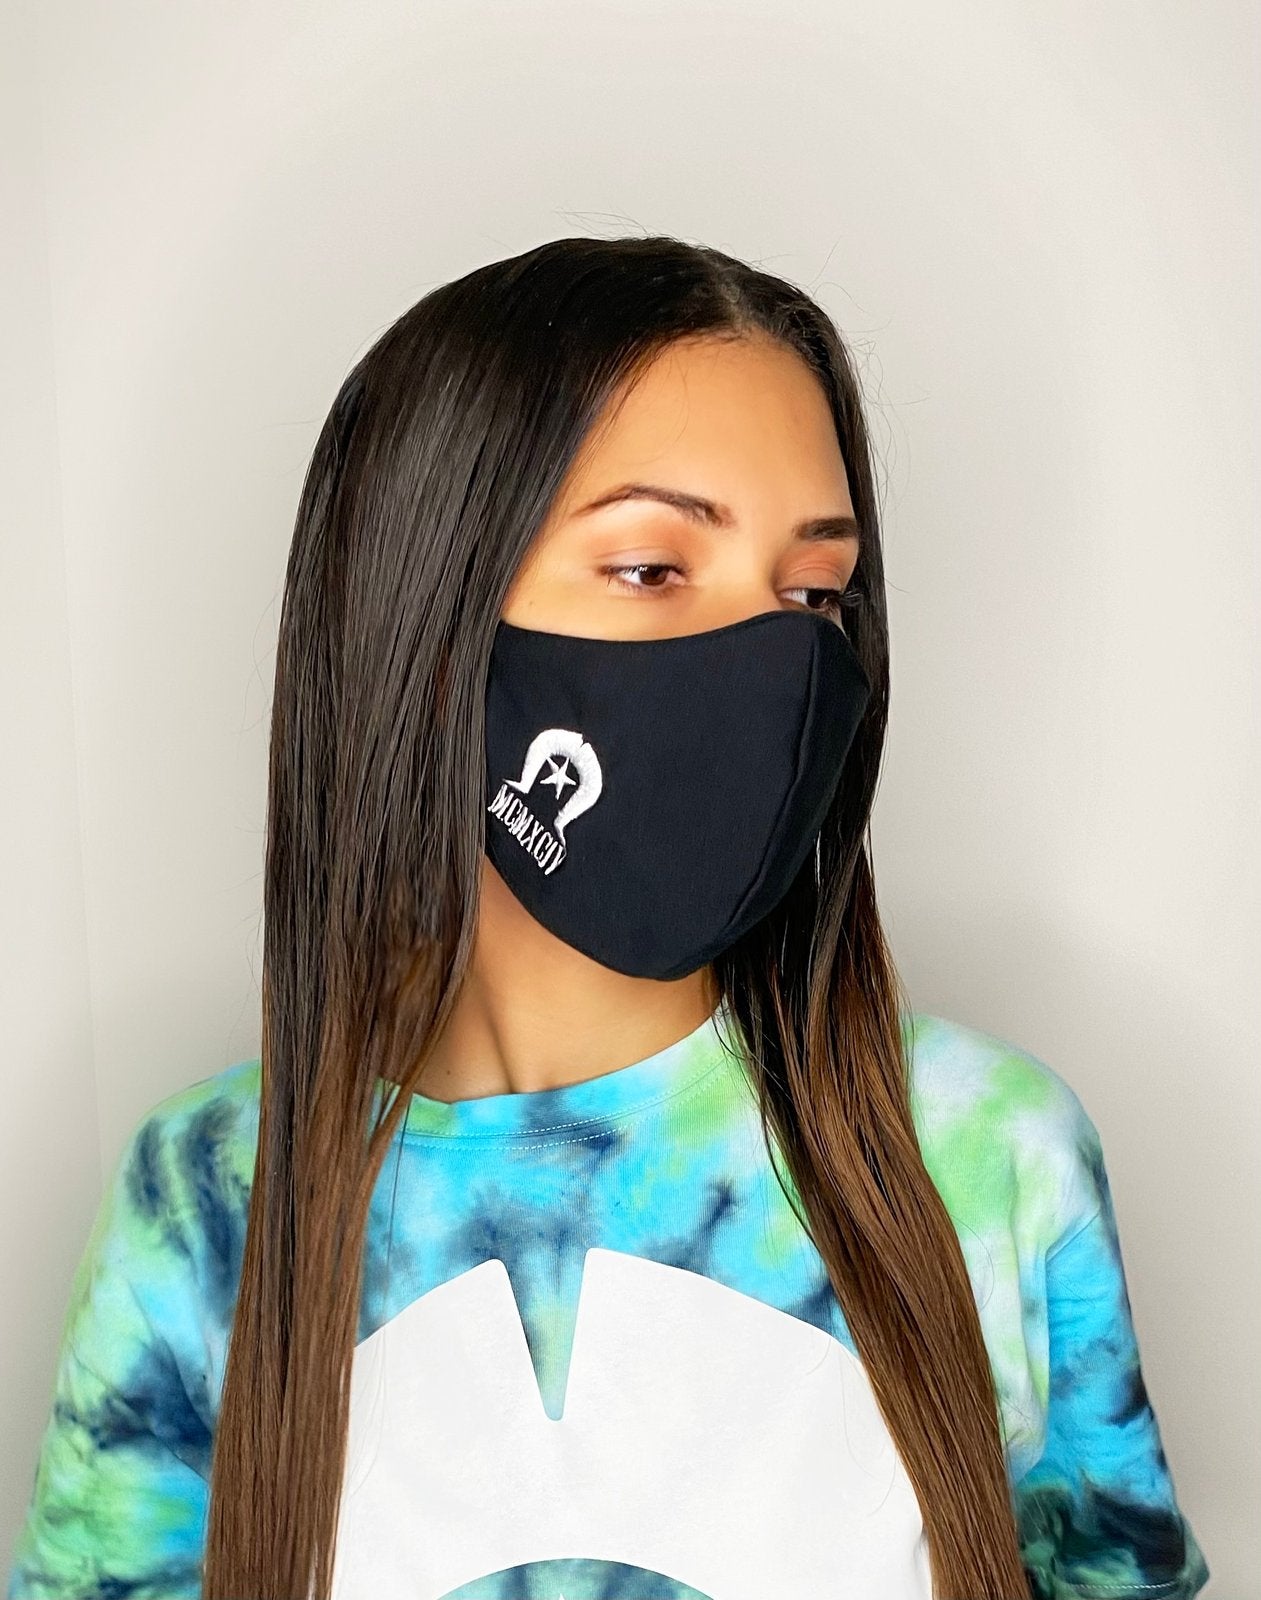 DHARI 94 MASK 2 (One size fits all)